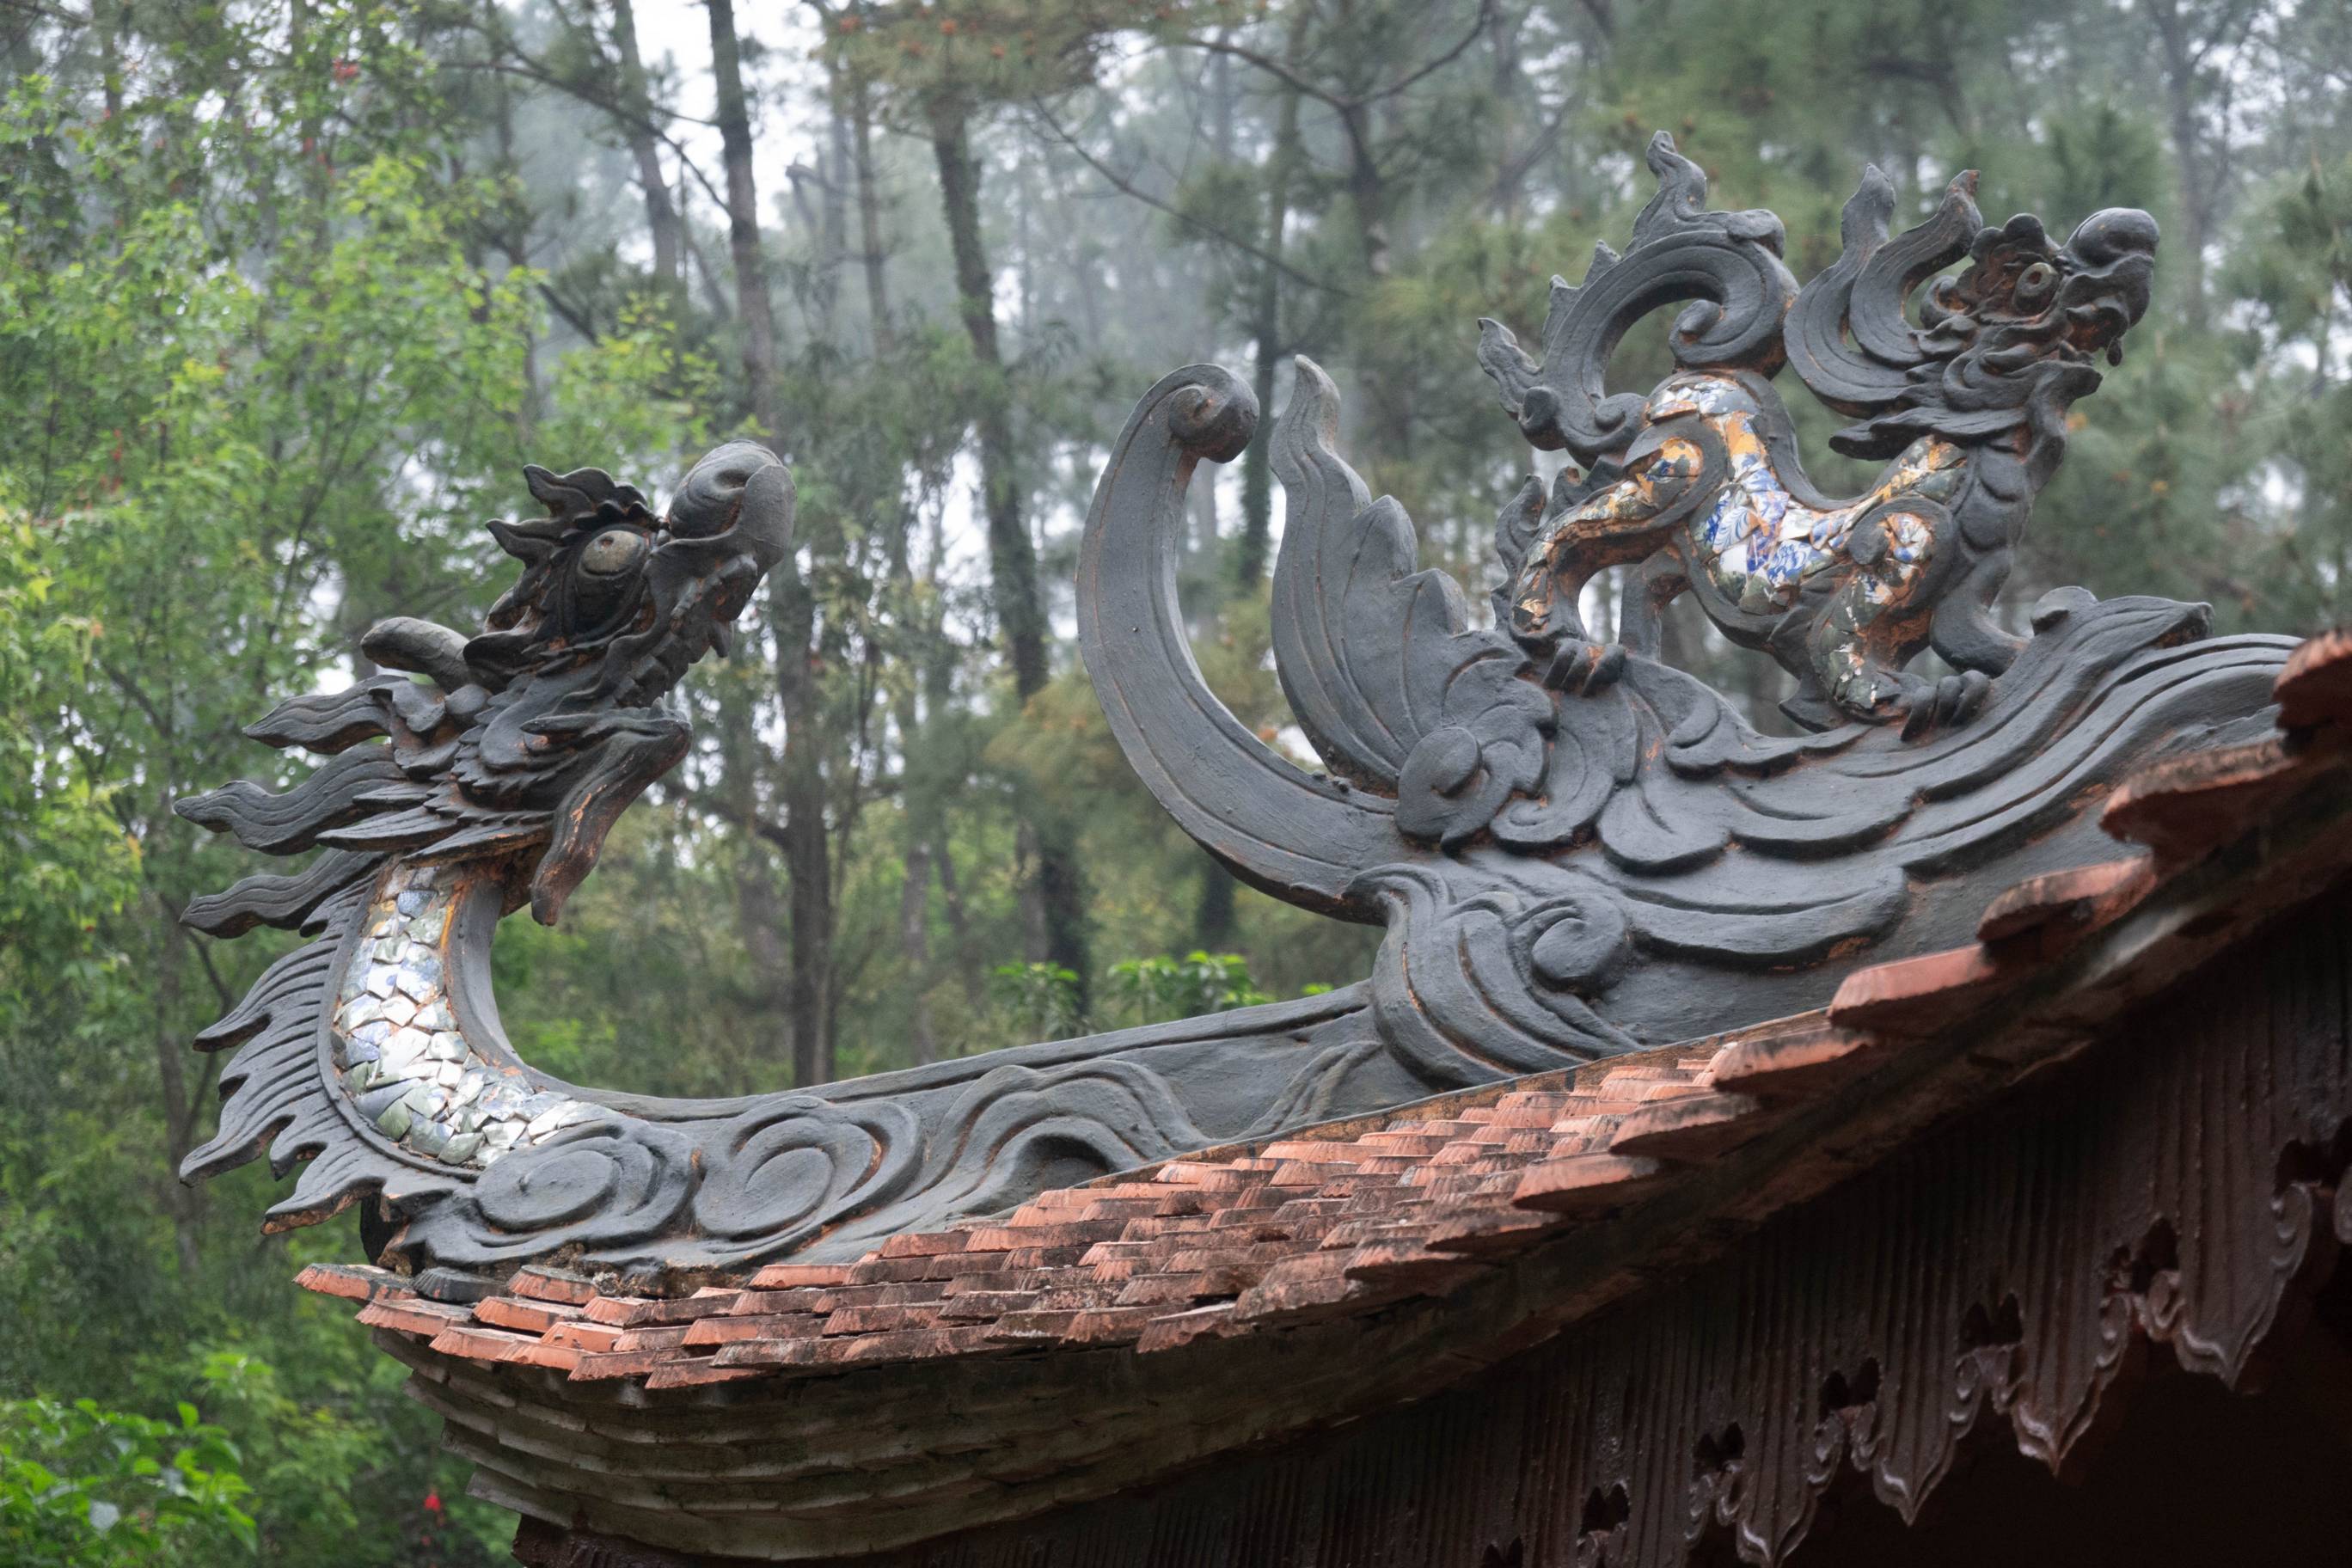 Picture showing a dragon and lion on a roof. The dragon is the figure on the left.